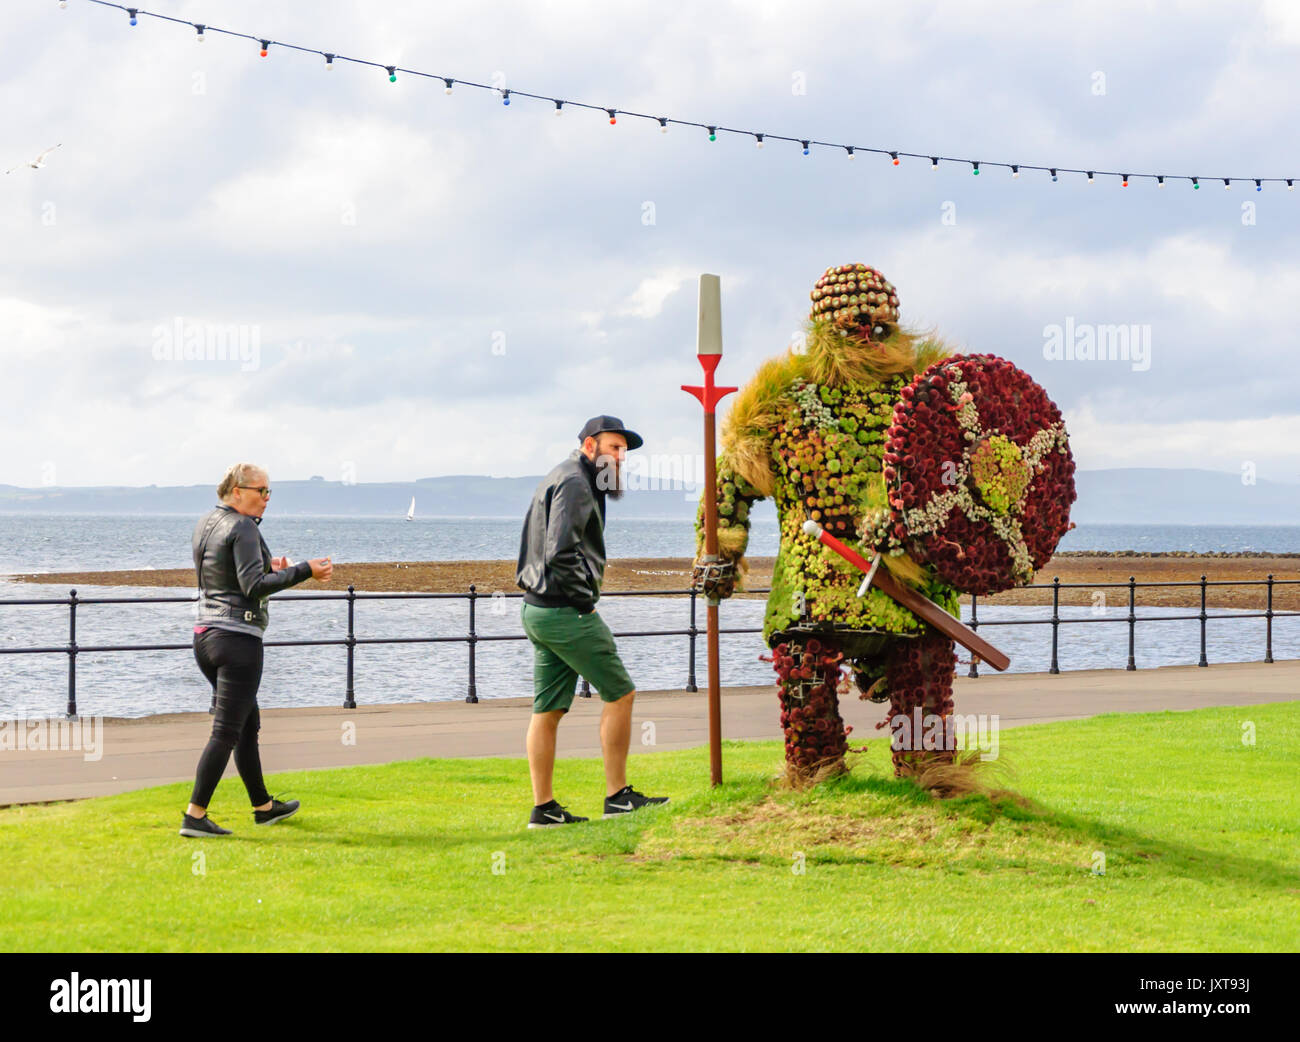 Largs, Scotland, UK. 17th August, 2017. UK Weather: A giant statue of Magnus the Viking made of flowers on the promenade enjoying sunny intervals and occasional heavy showers at the seaside in the west coast of Scotland resort town. The Vikings were defeated at the Battle of Largs in 1263, their last raid on Scottish soil, under the treaty of Perth Magnus the King of Norway surrendered the Western Isles and the Isle of Man to the Scottish Crown in 1266. Credit: Skully/Alamy Live News Stock Photo